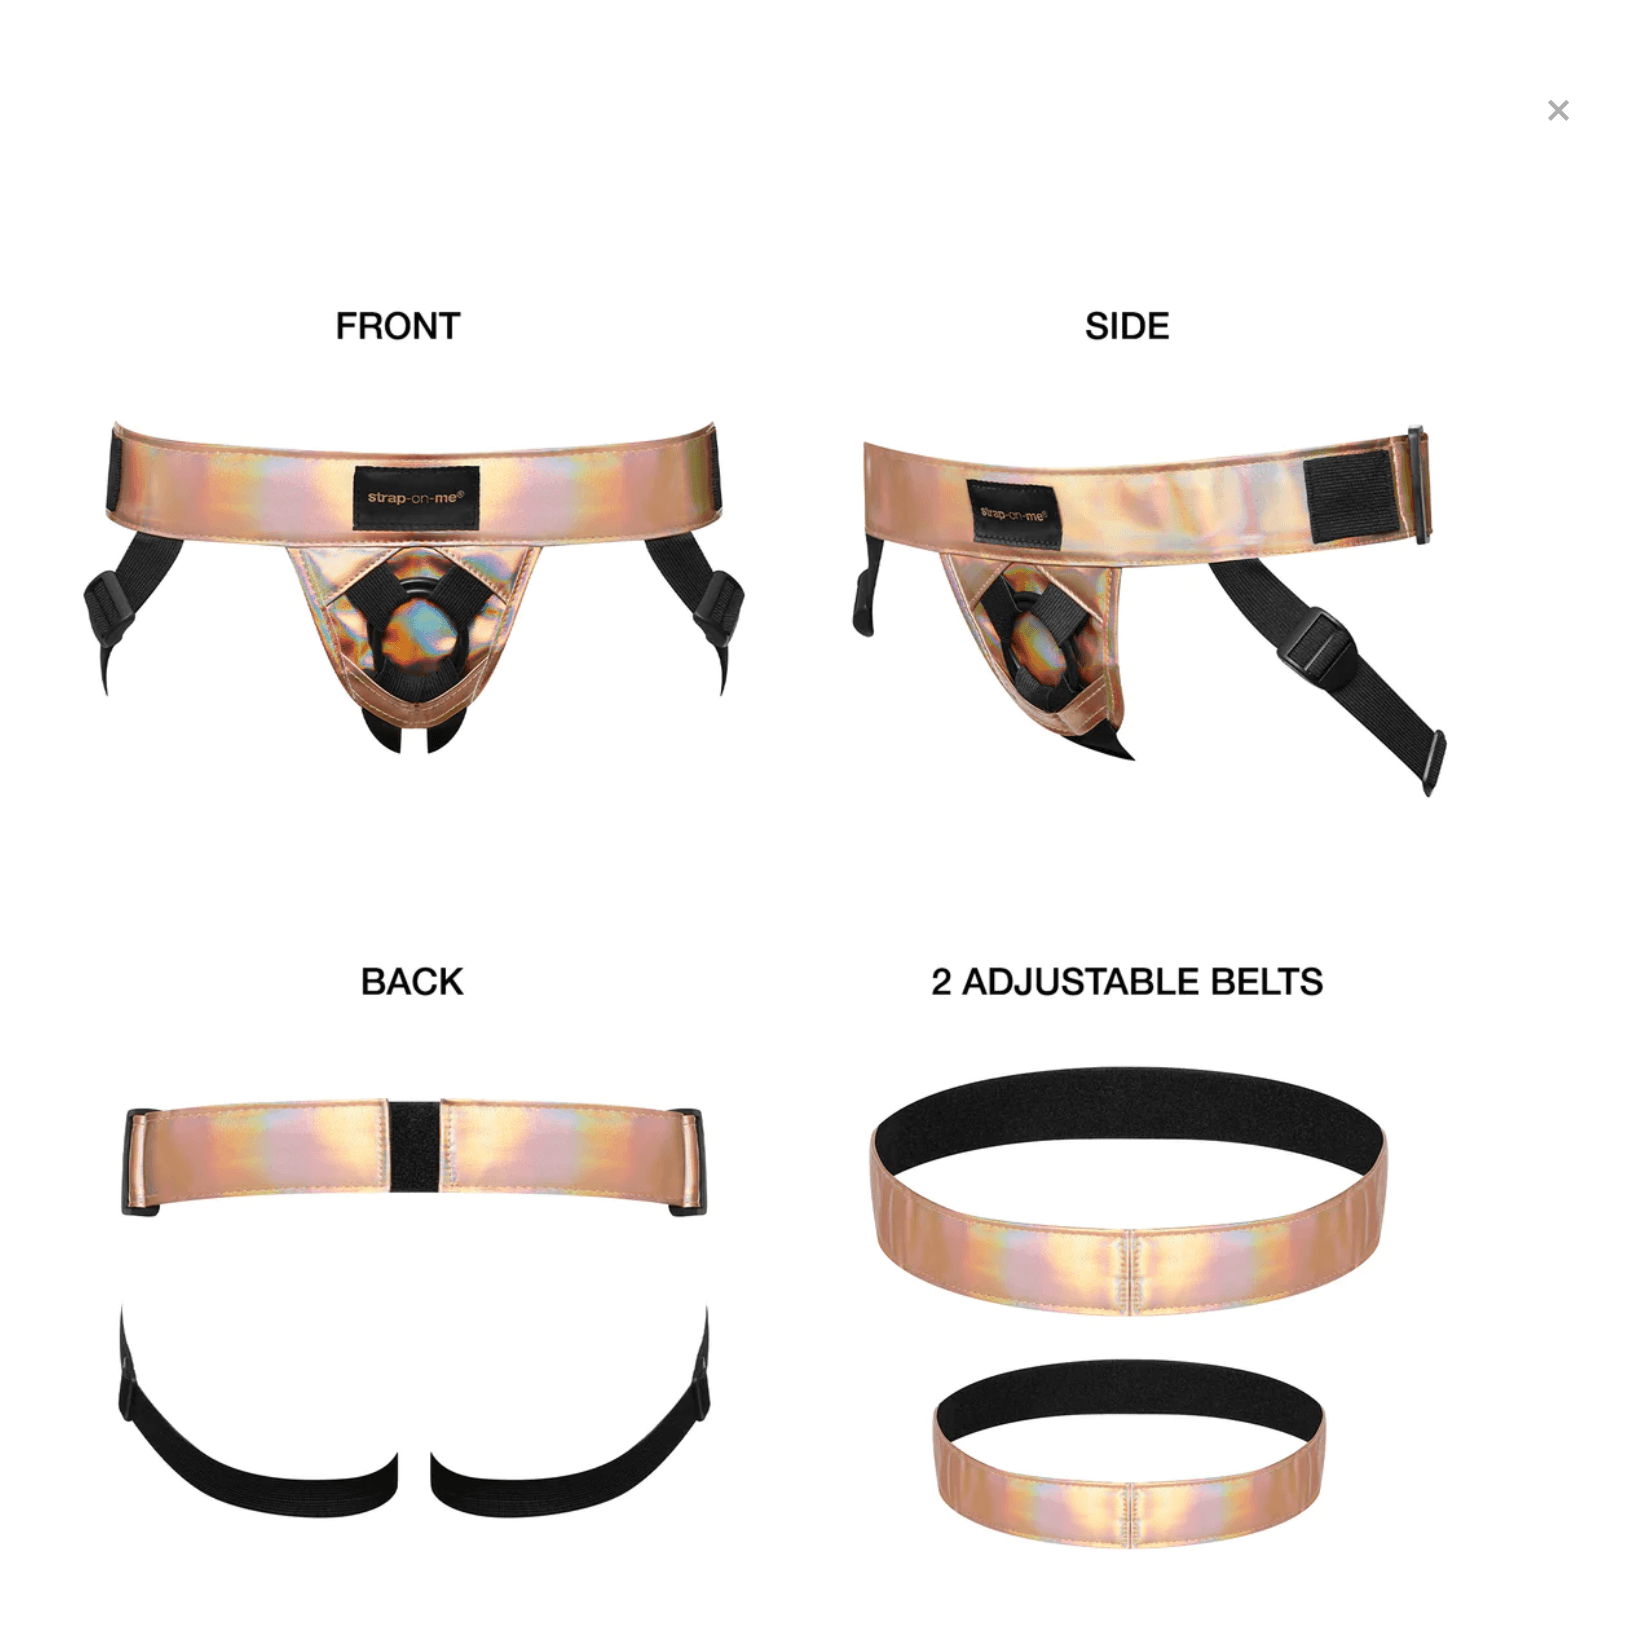 Strap-On-Me Curious Leatherette Harness - Holographic Rose Gold - shop enby